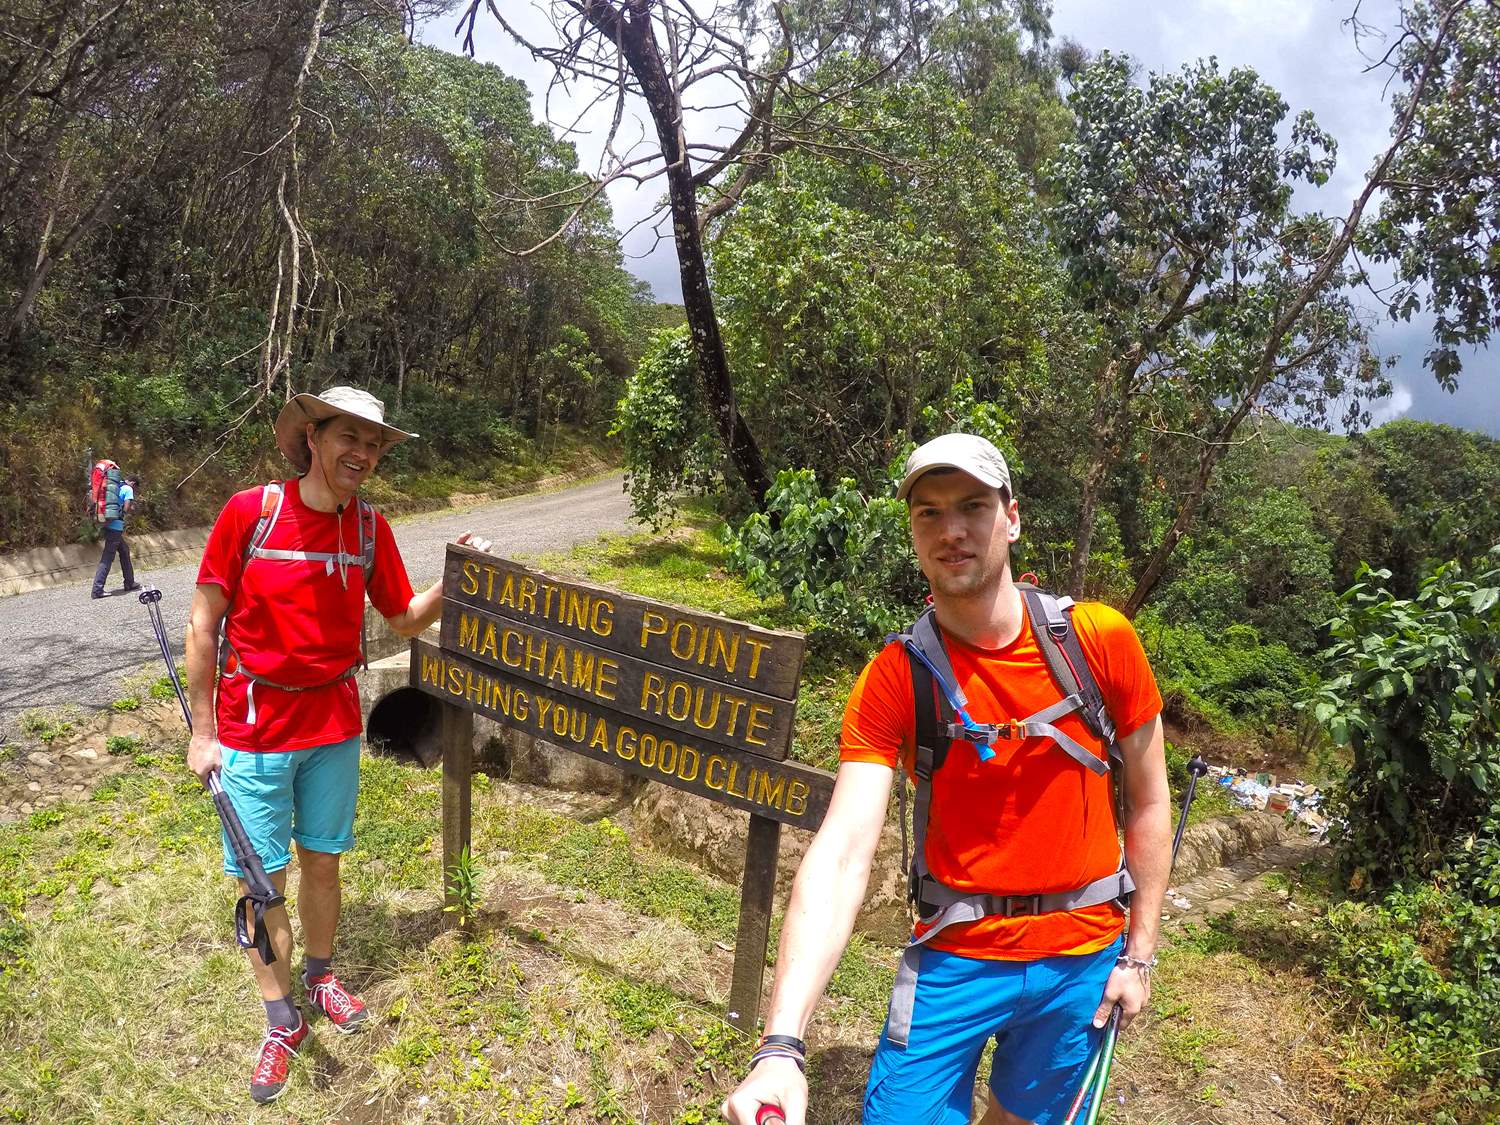 Starting point Machame route